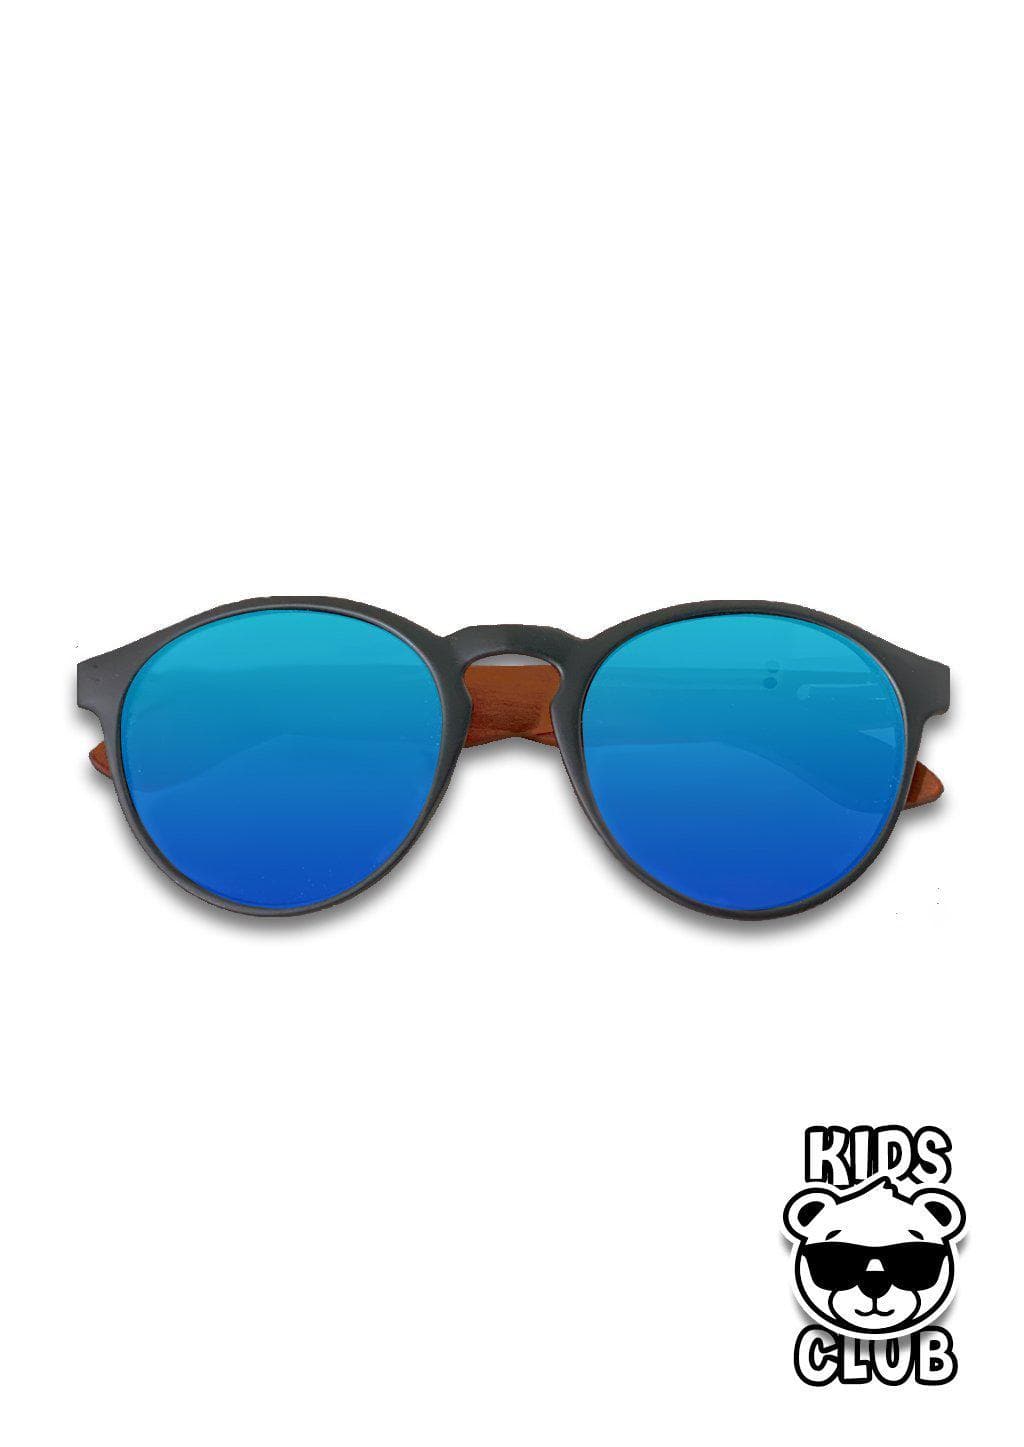 Eyewood Cubs - Lilo - Wooden sunglasses for kids and toddlers.